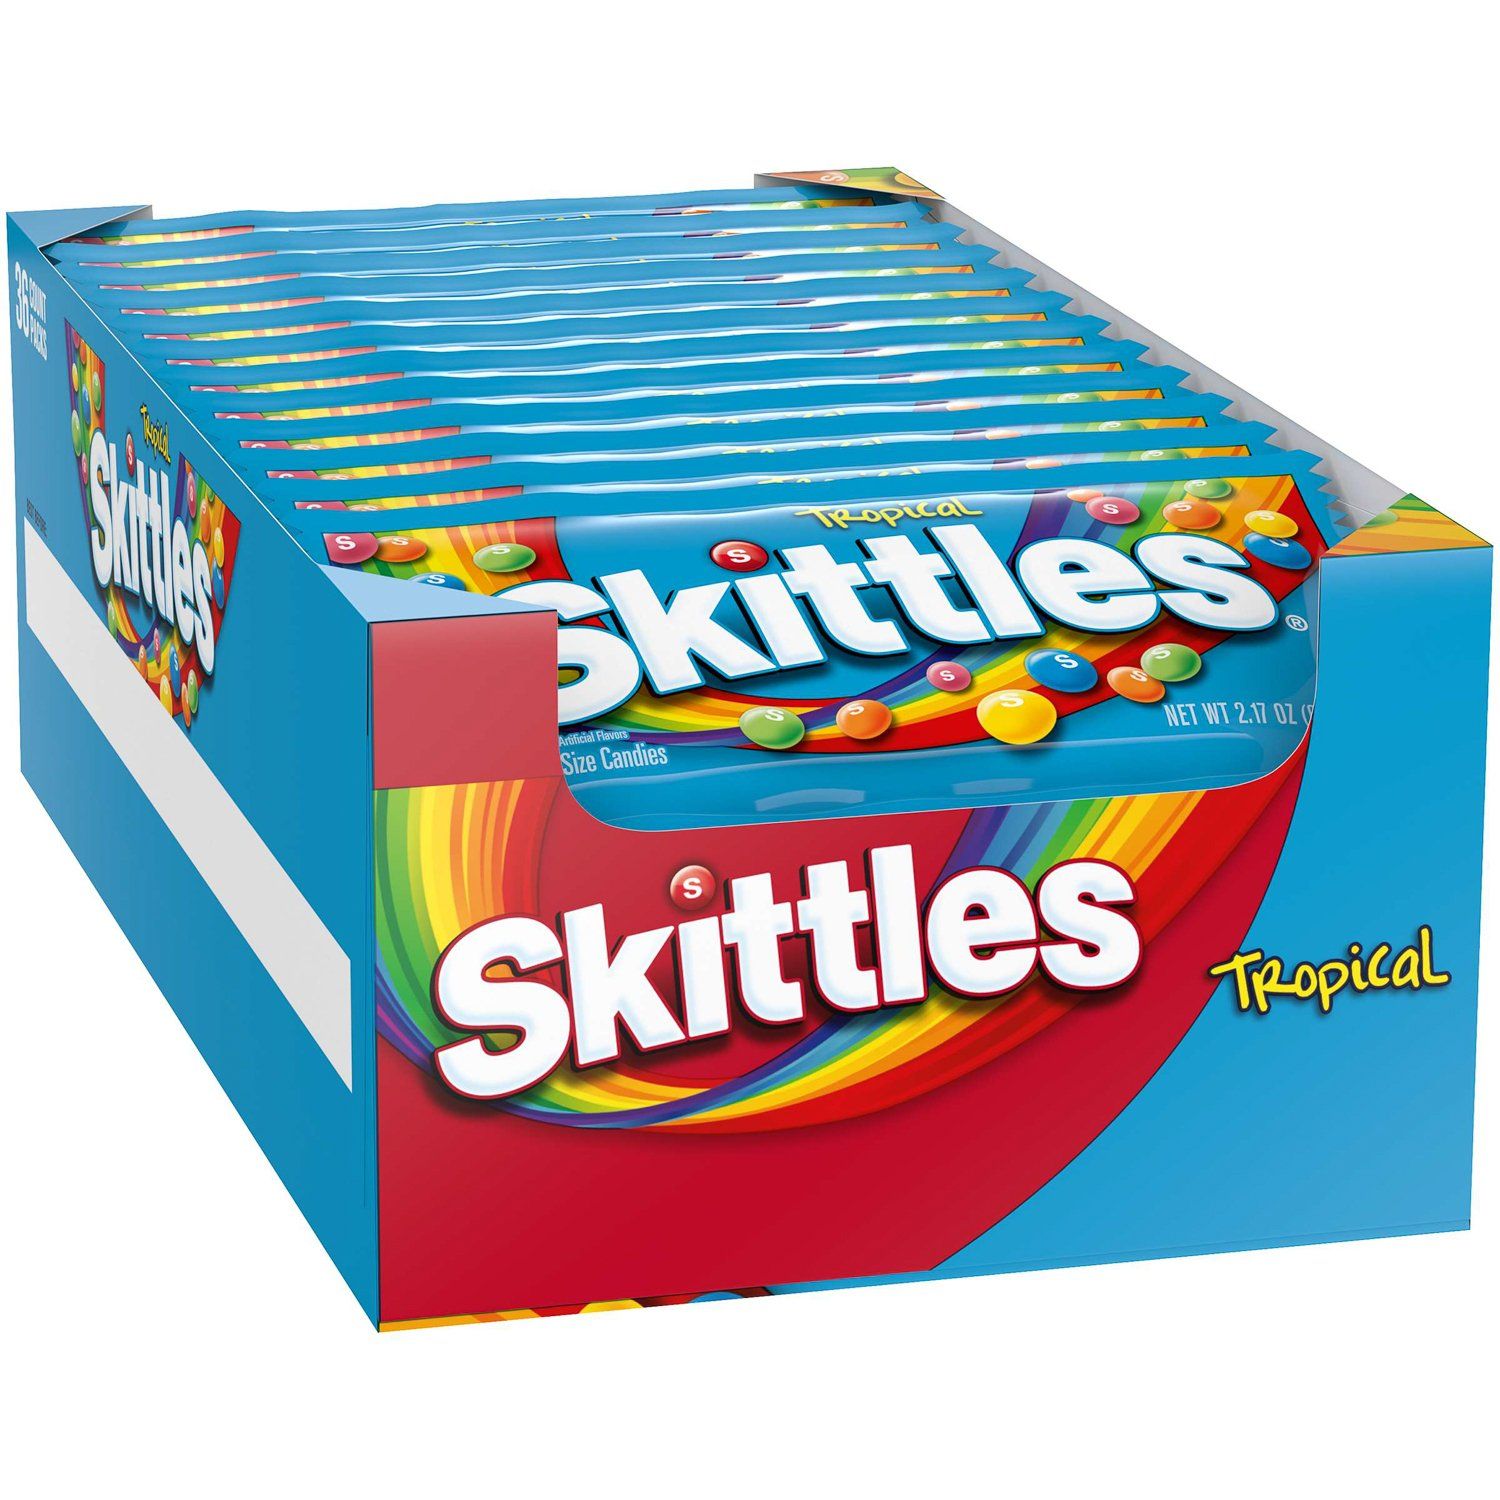 Skittles Candy Skittles Tropical 2.17 Oz-36 Count 